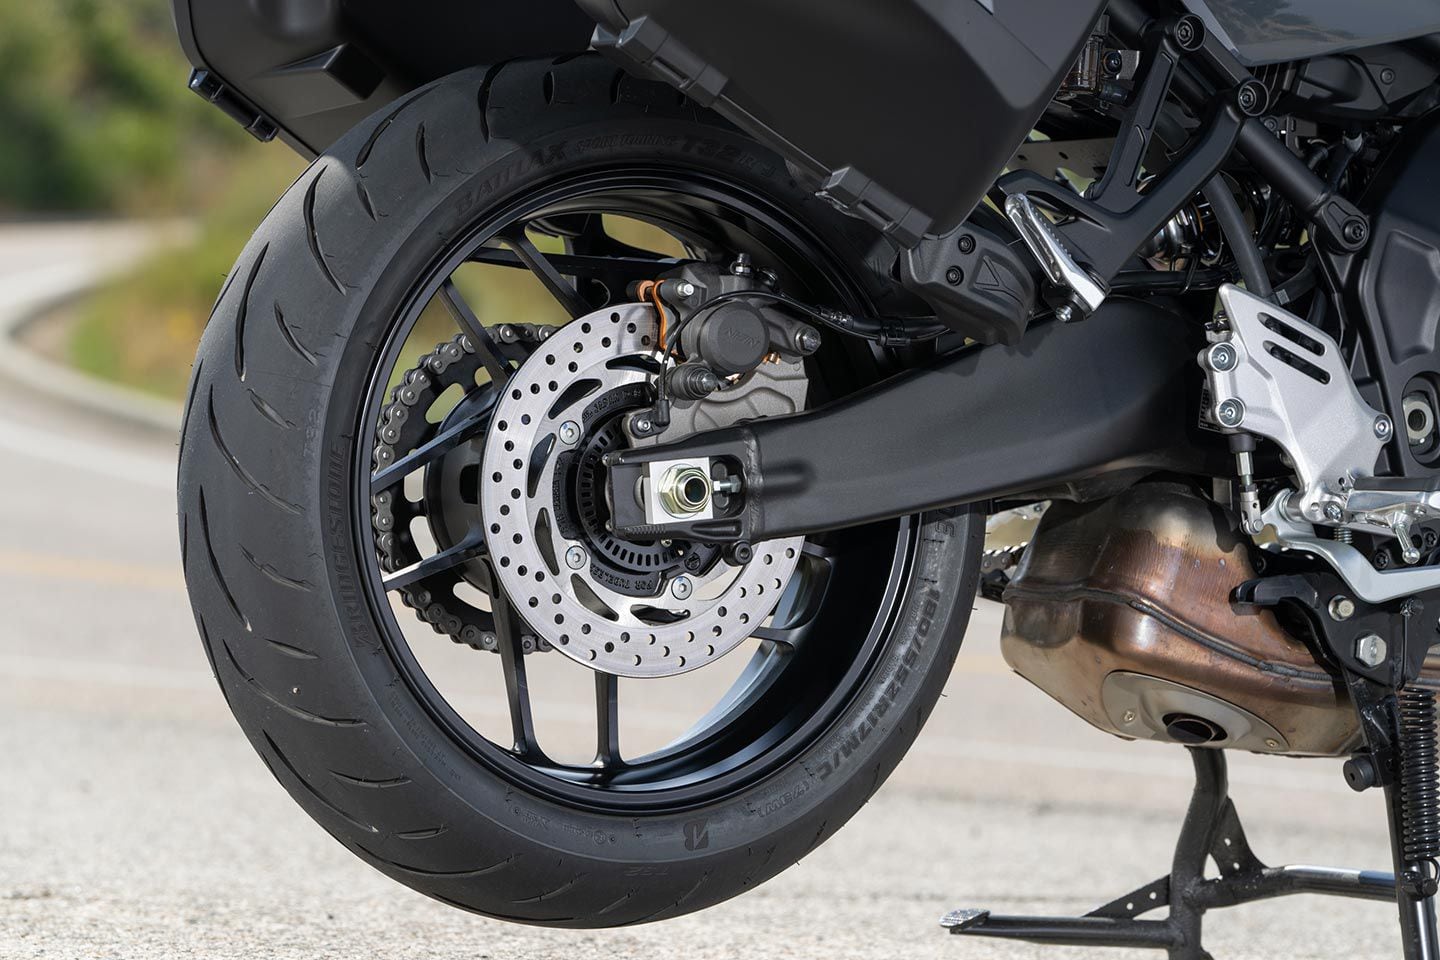 A larger 267mm rear disc is used because the Unified Brake System will likely depend on the rear brake more than most users would on their own.